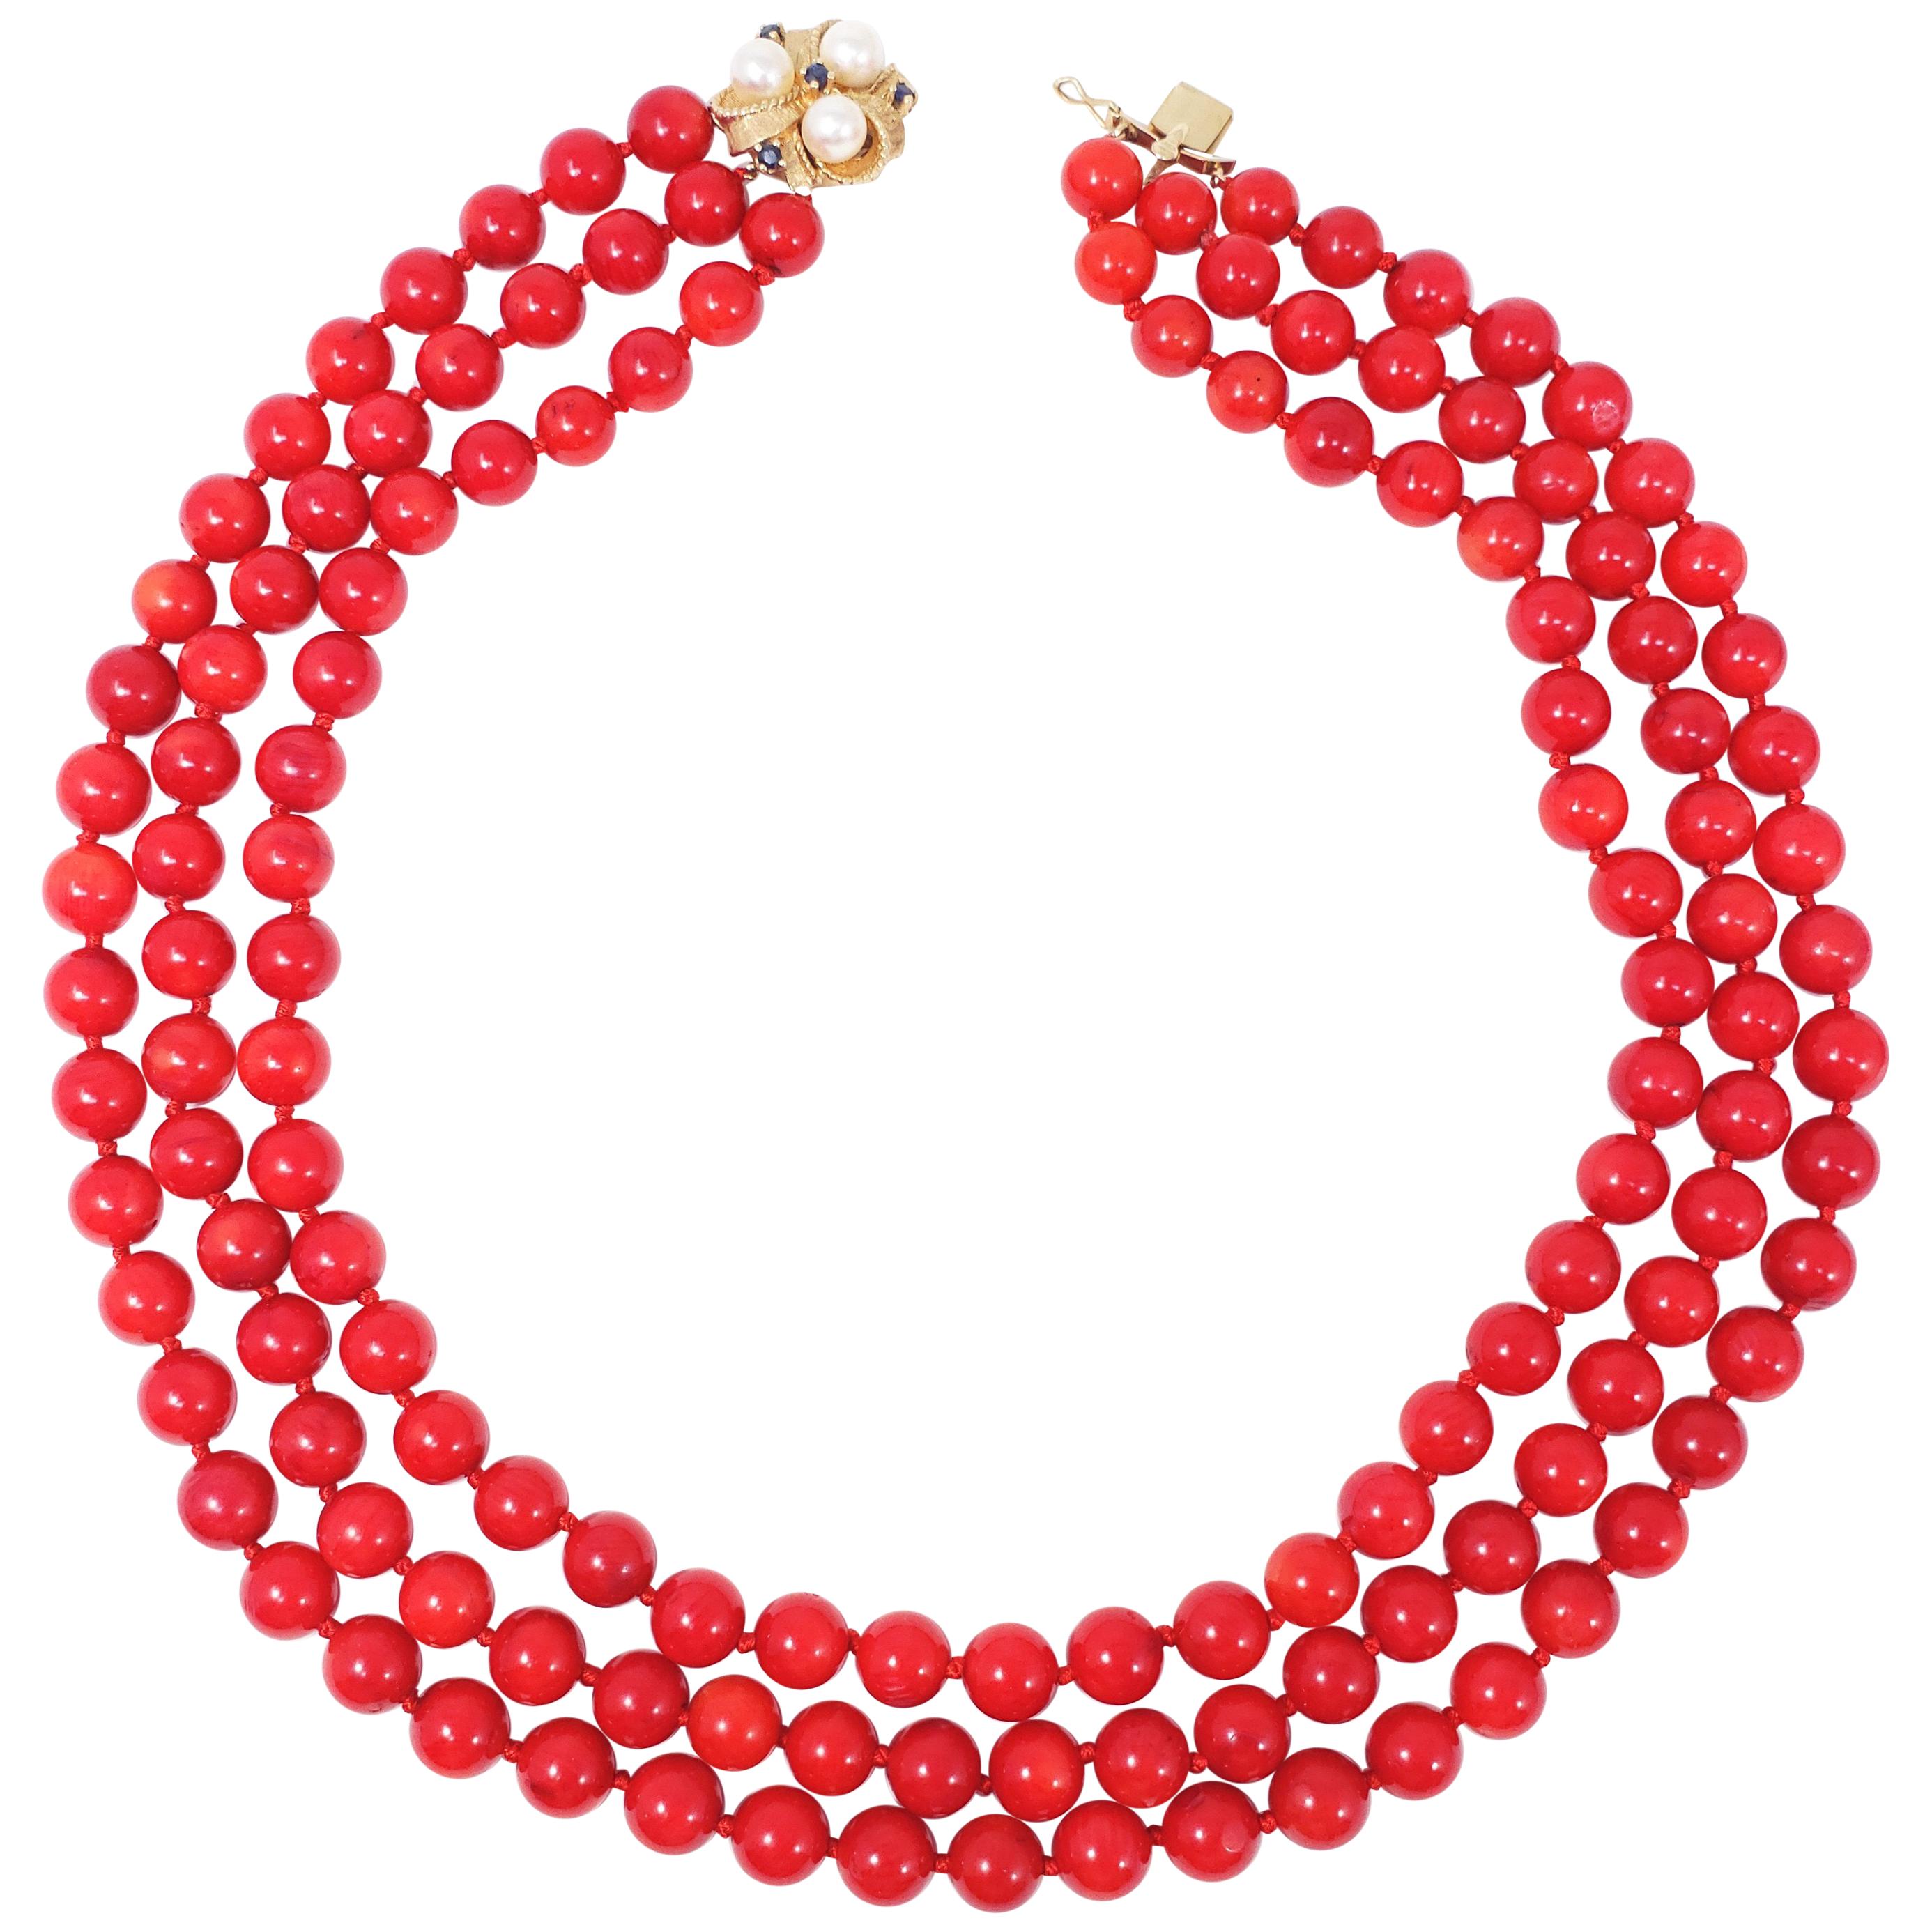 Three-Strand Genuine Red Coral Necklace, 14 Karat Clasp with Pearls, Sapphires